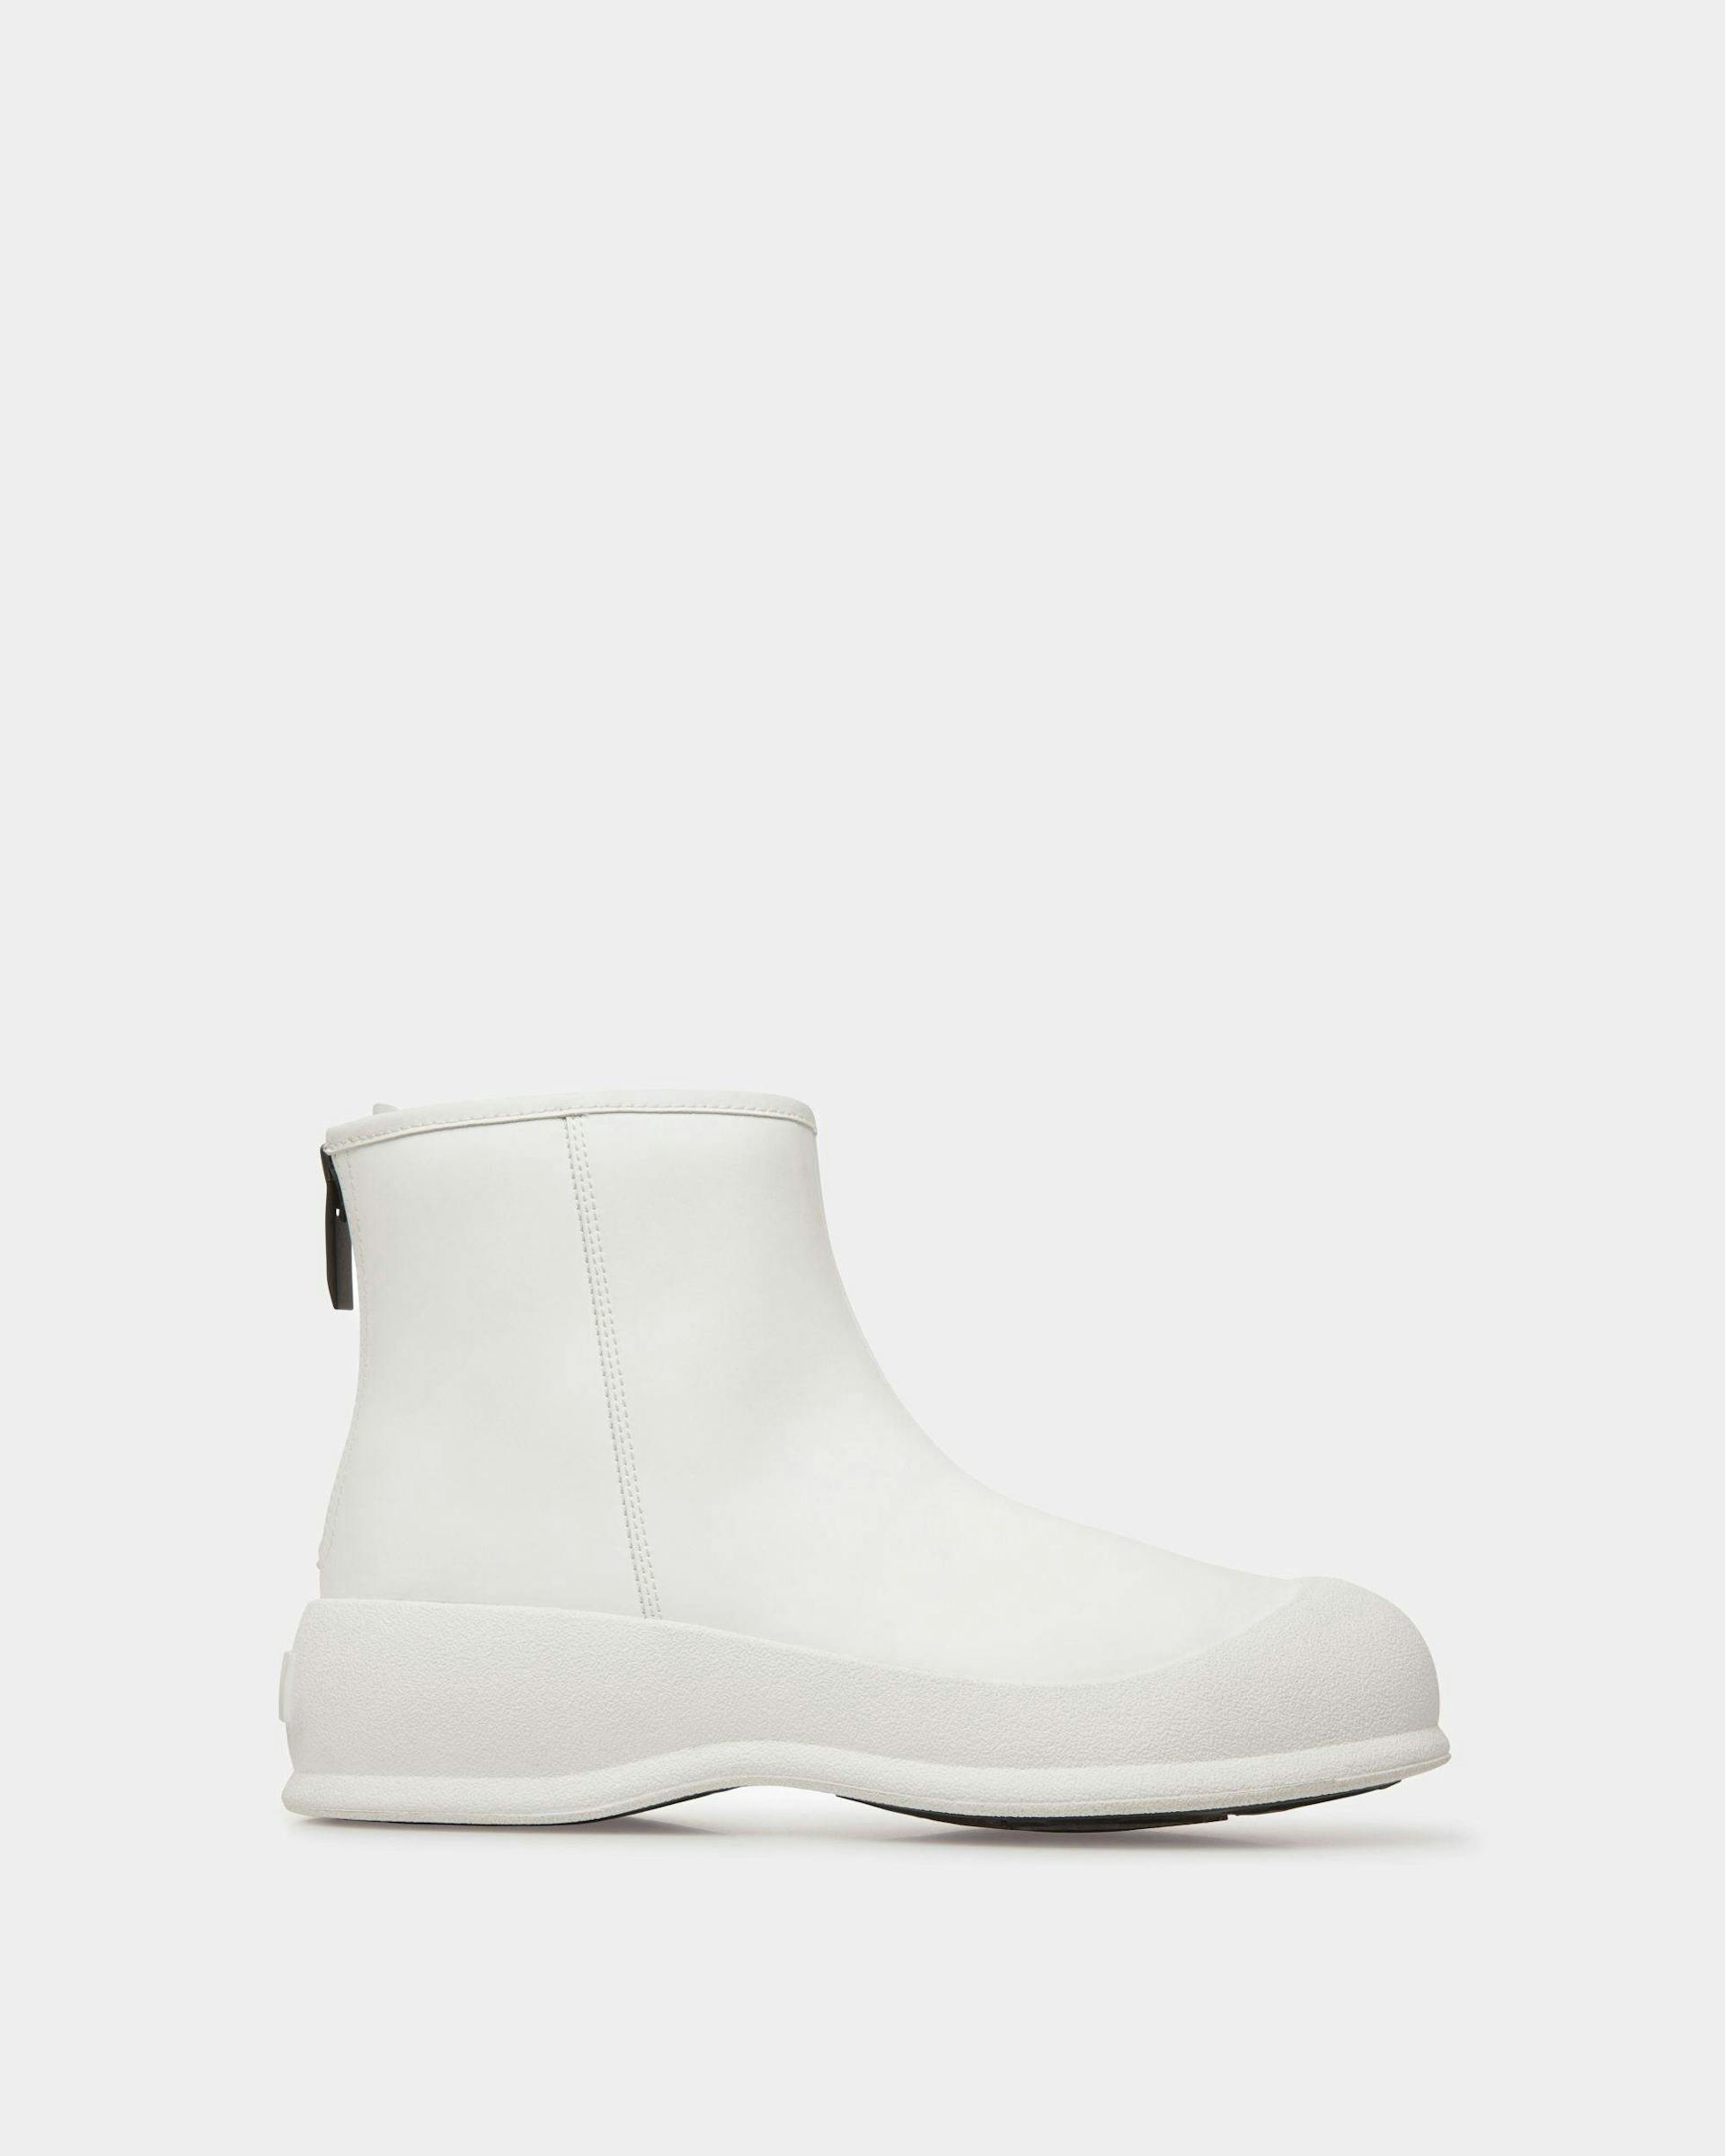 Women's Frei Boots In White Rubber-coated Leather | Bally | Still Life Side